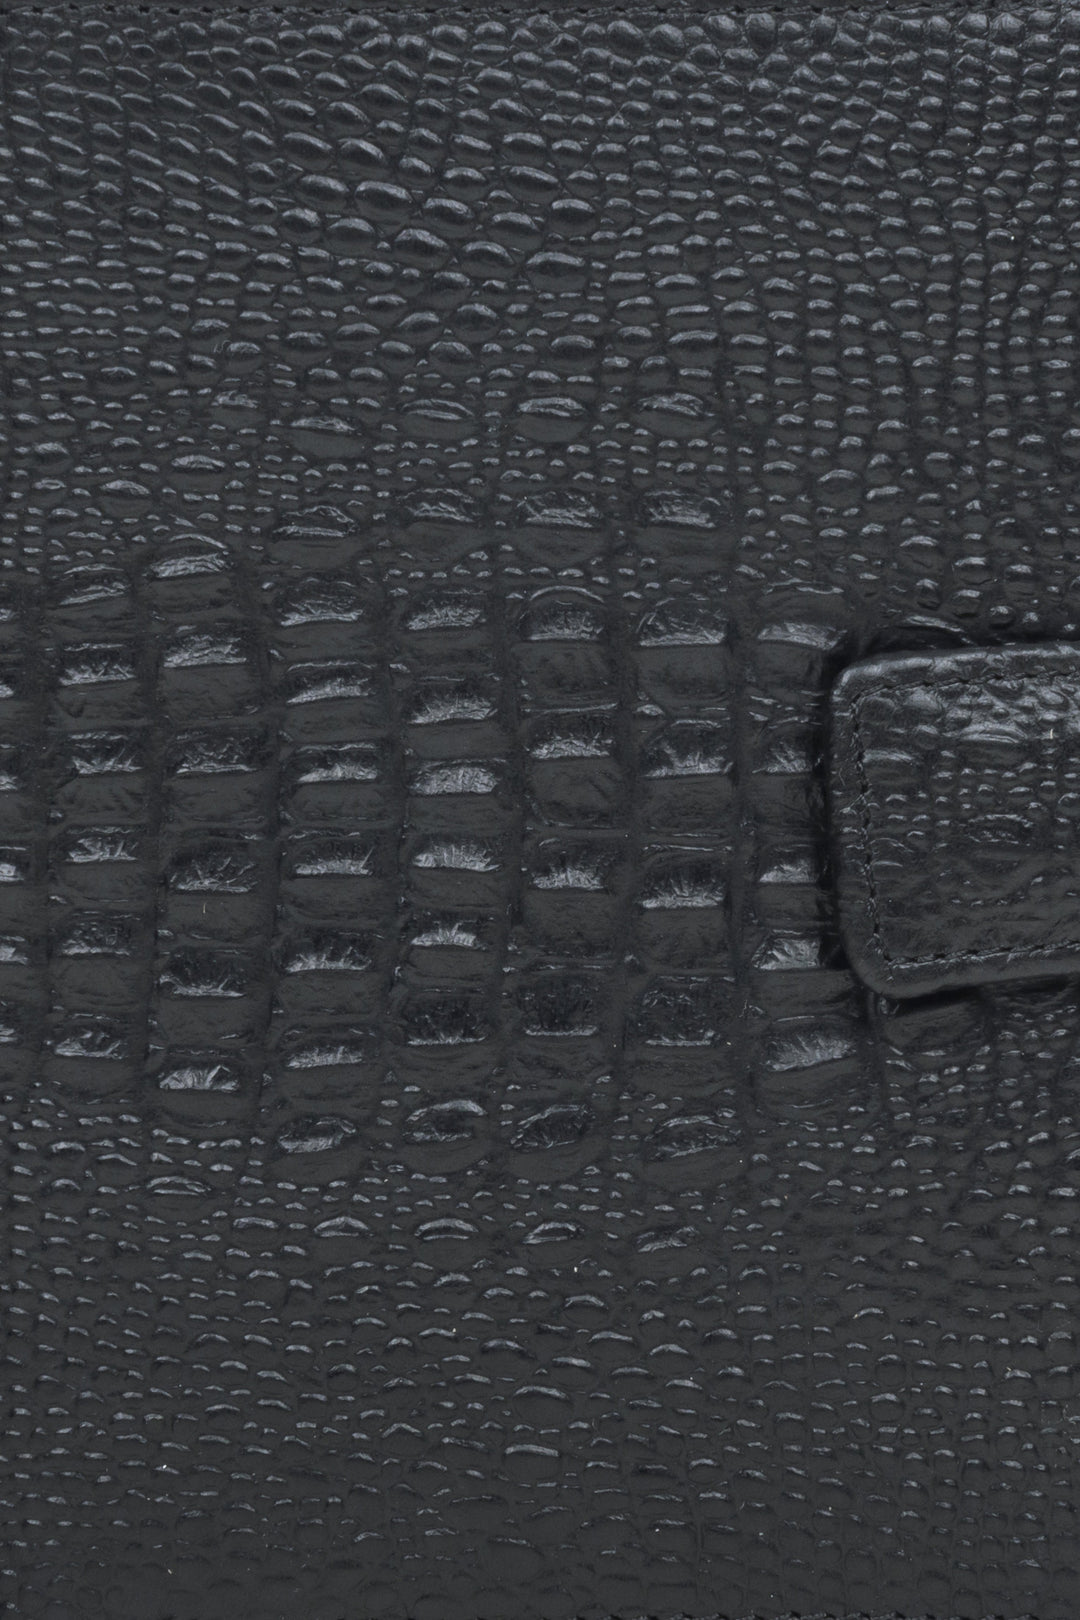 Men's black functional wallet made of genuine leather by Estro - close-up on details.